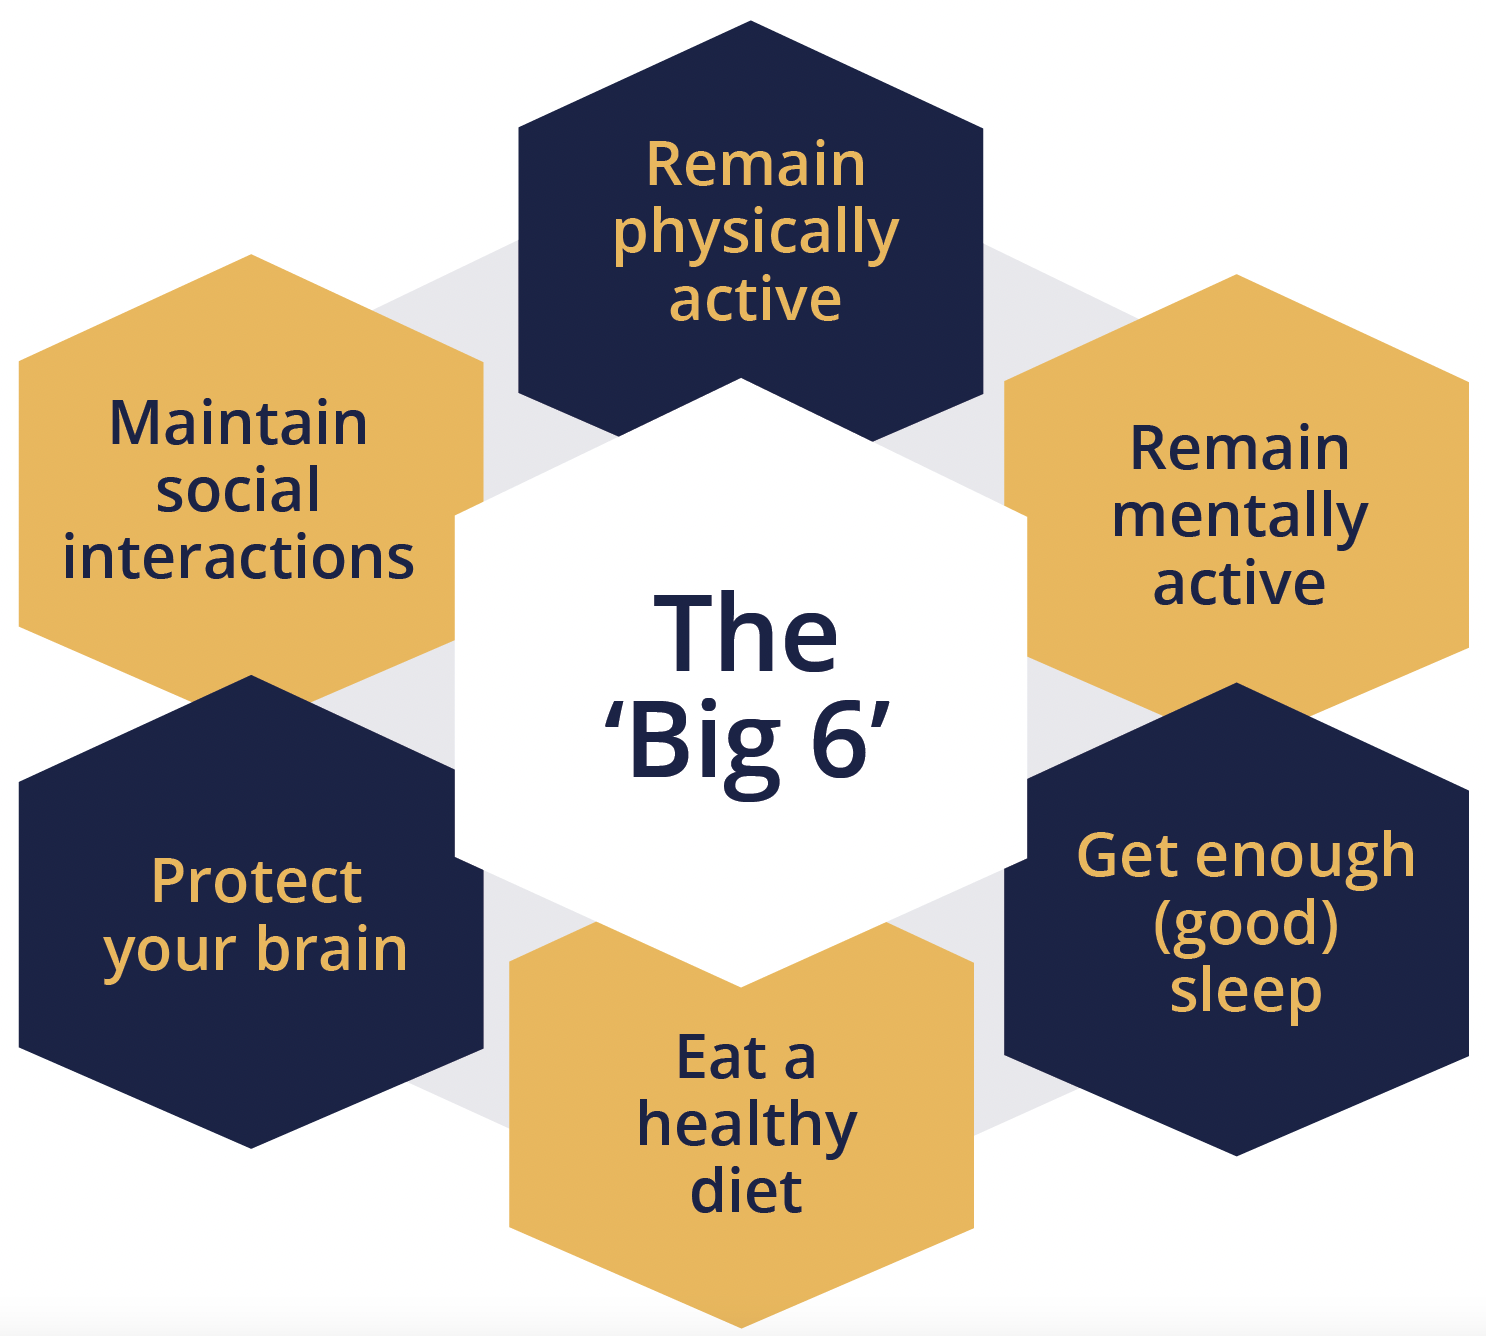 Six key steps for the promotion and preservation of brain health